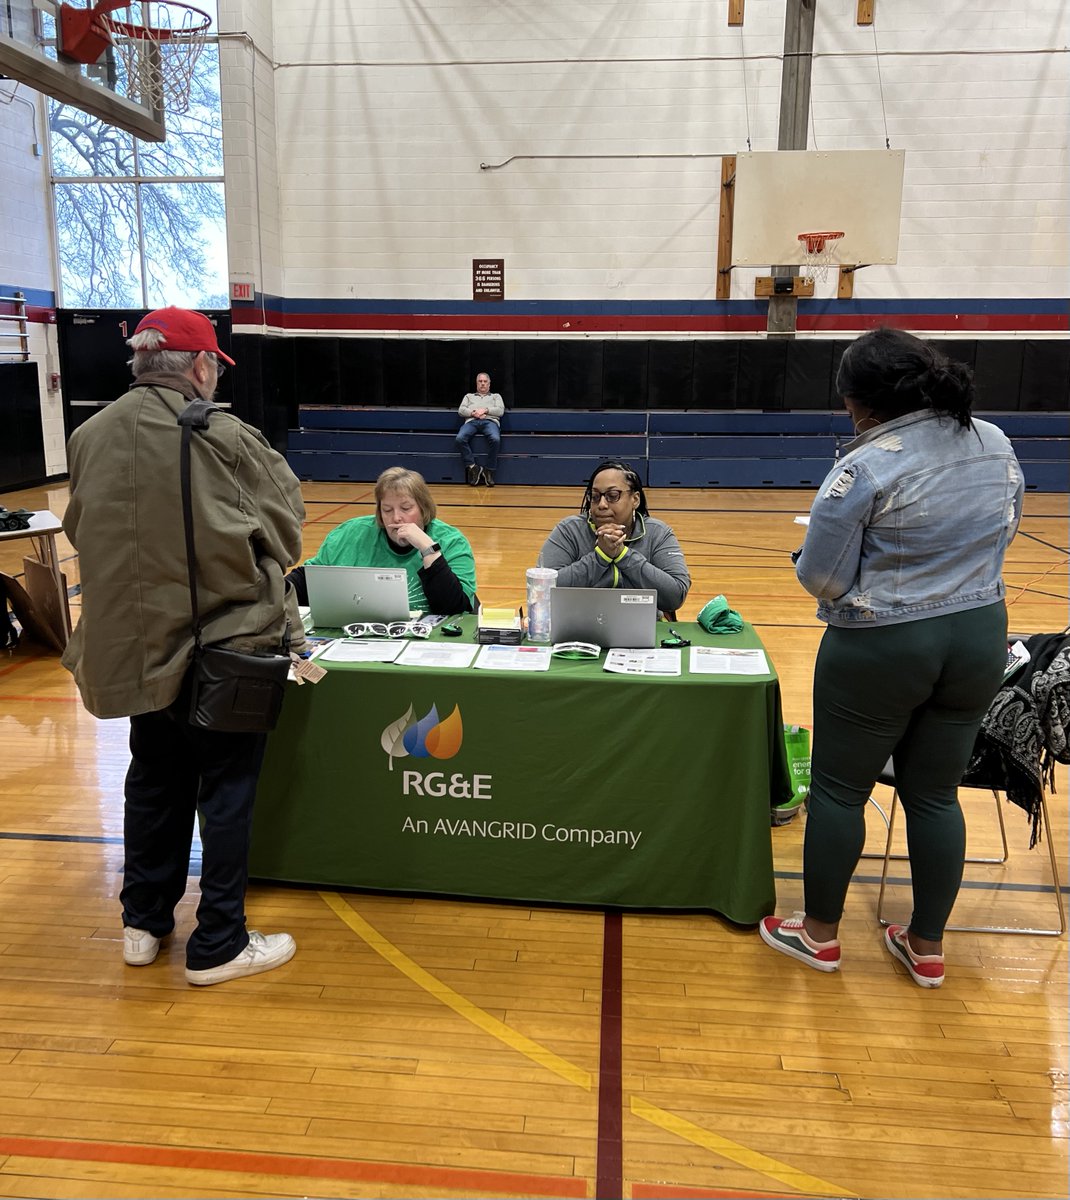 Connecting with our customers is essential. We helped more than 20 customers at last night’s multi-utility event in Rochester. We thank our community partners who joined us. Look for more of these events in the future.